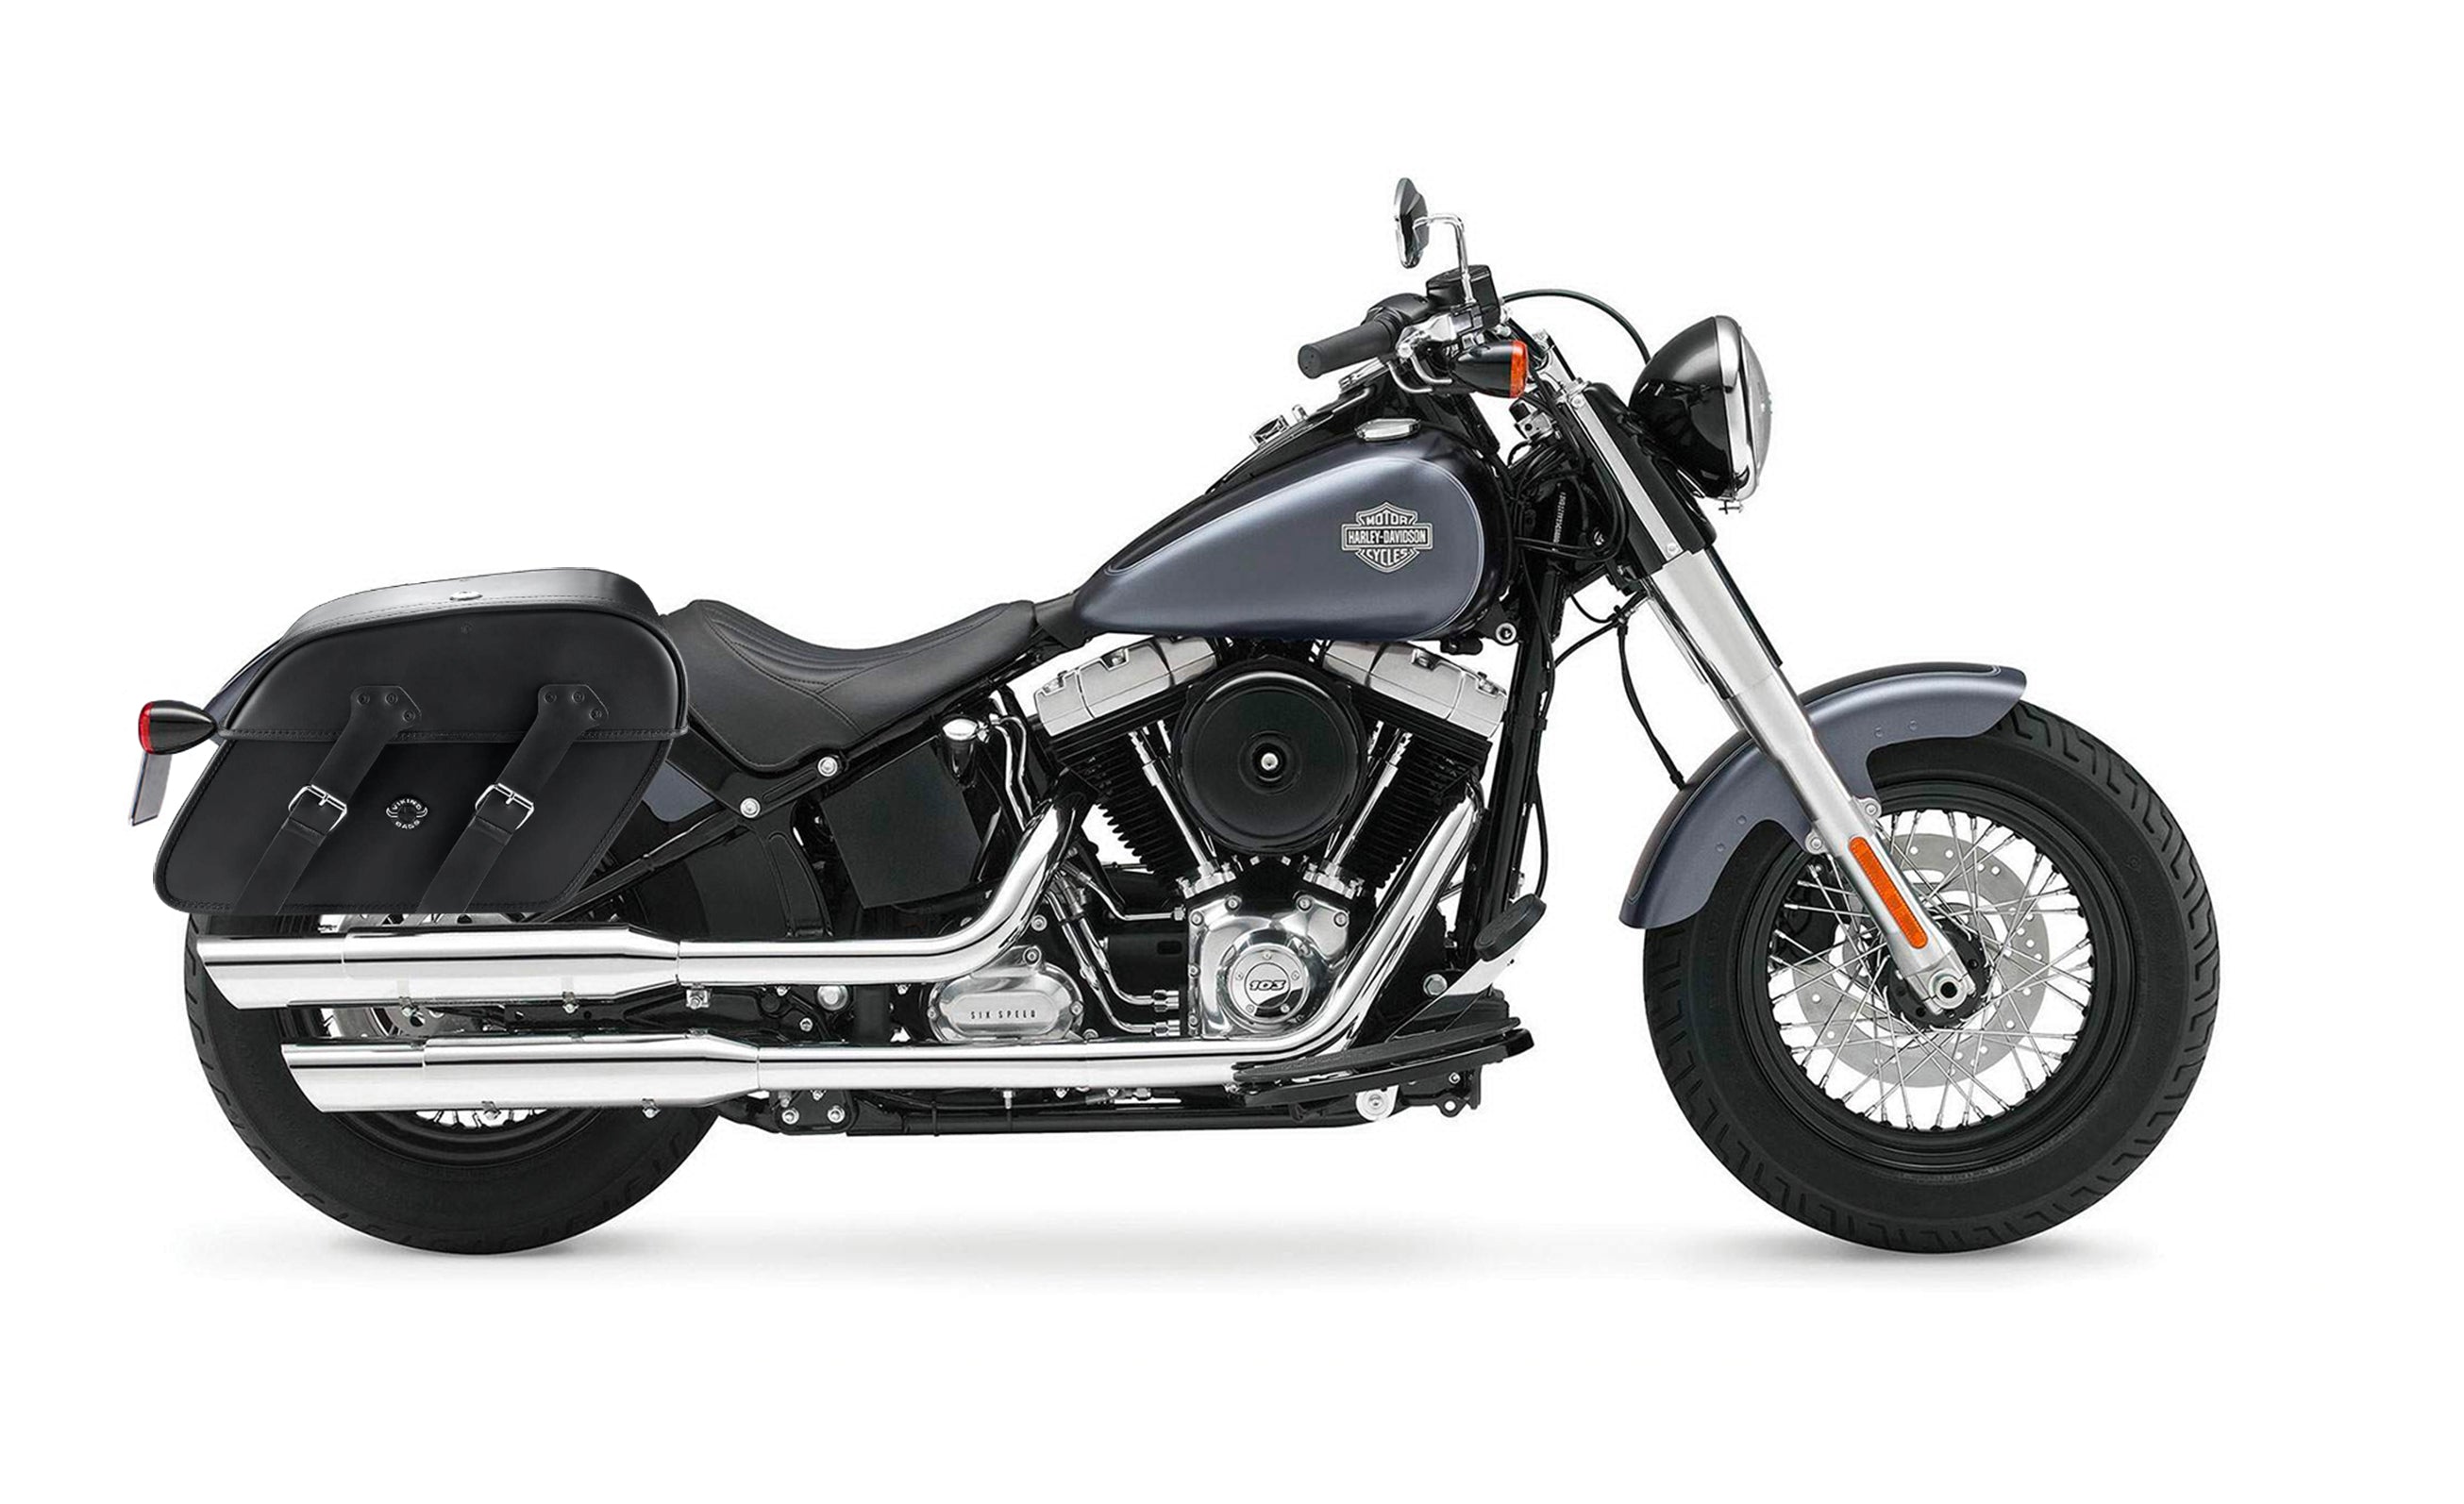 40L - Raven XL Leather Motorcycle Saddlebags for Harley Softail Slim FLS on Bike Photo @expand